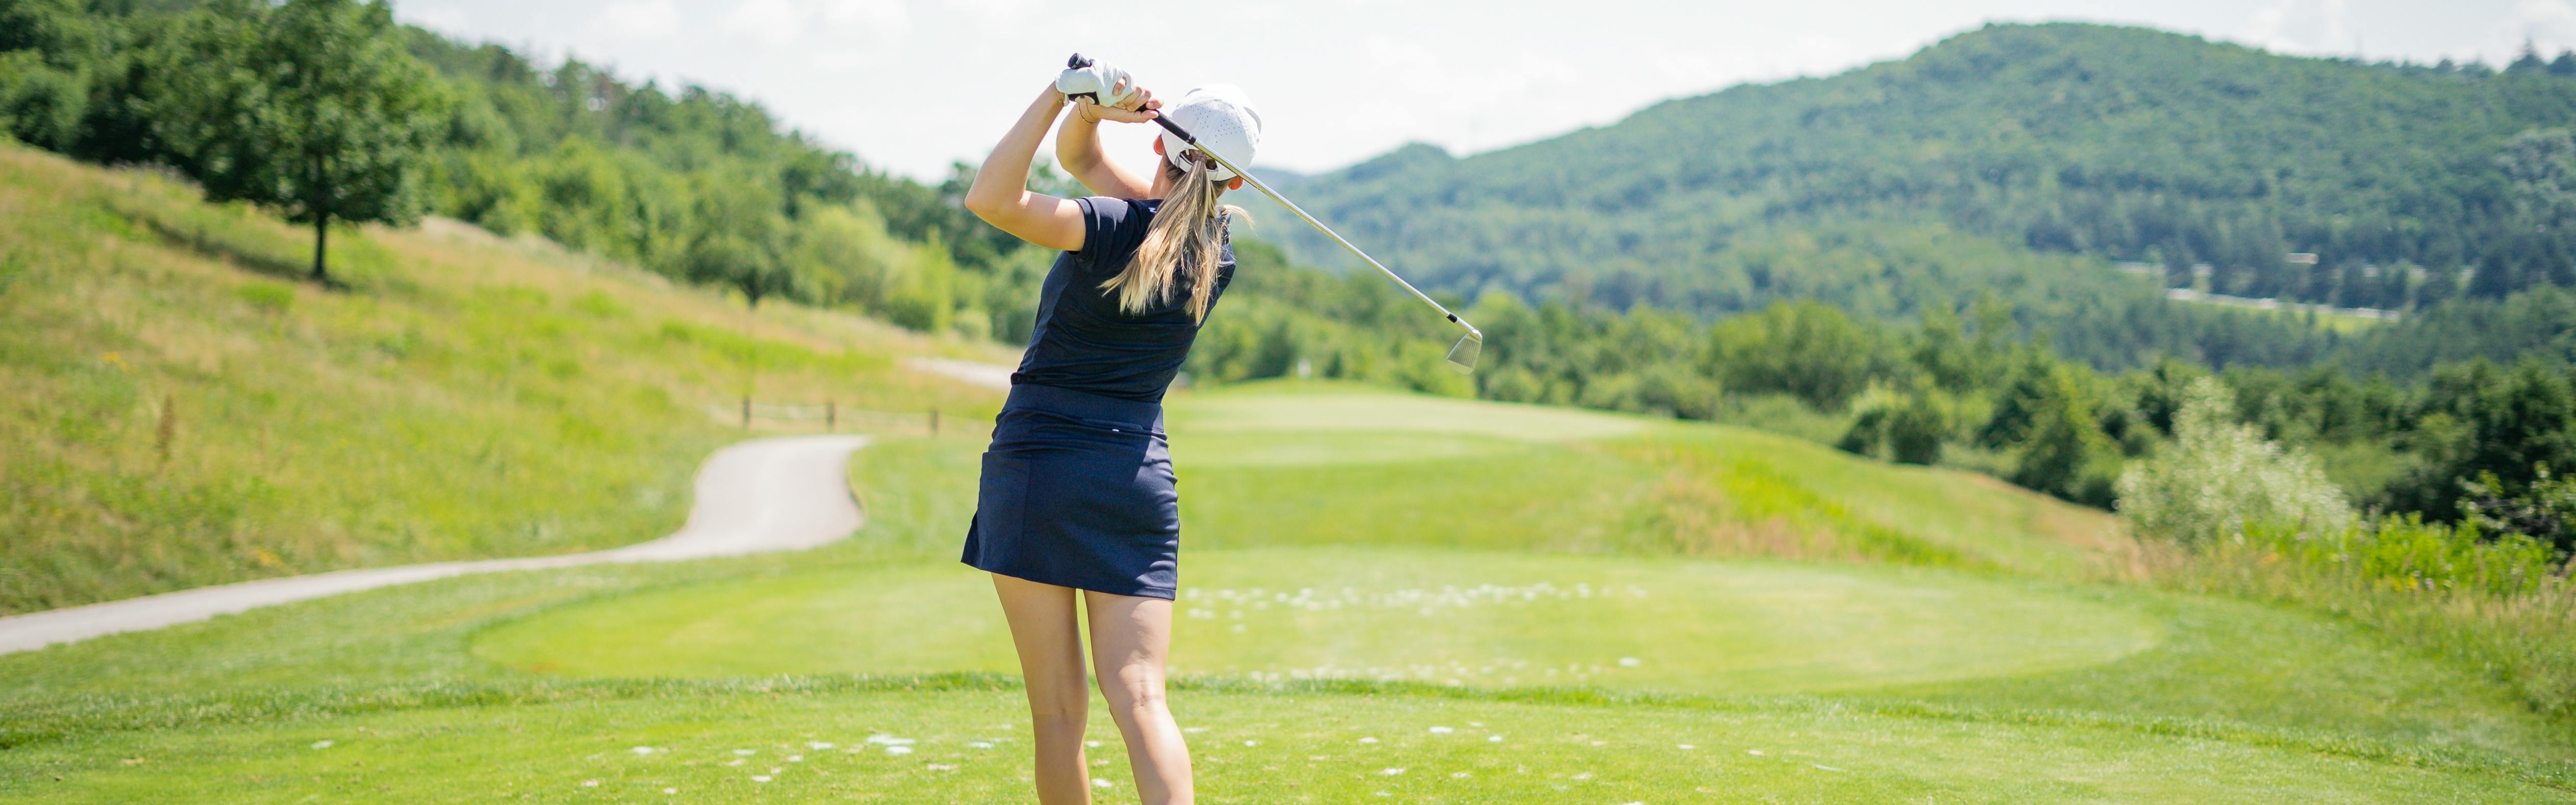 16 Stylish Womens Golf Pants That Hold Up Under Pressure on the Green